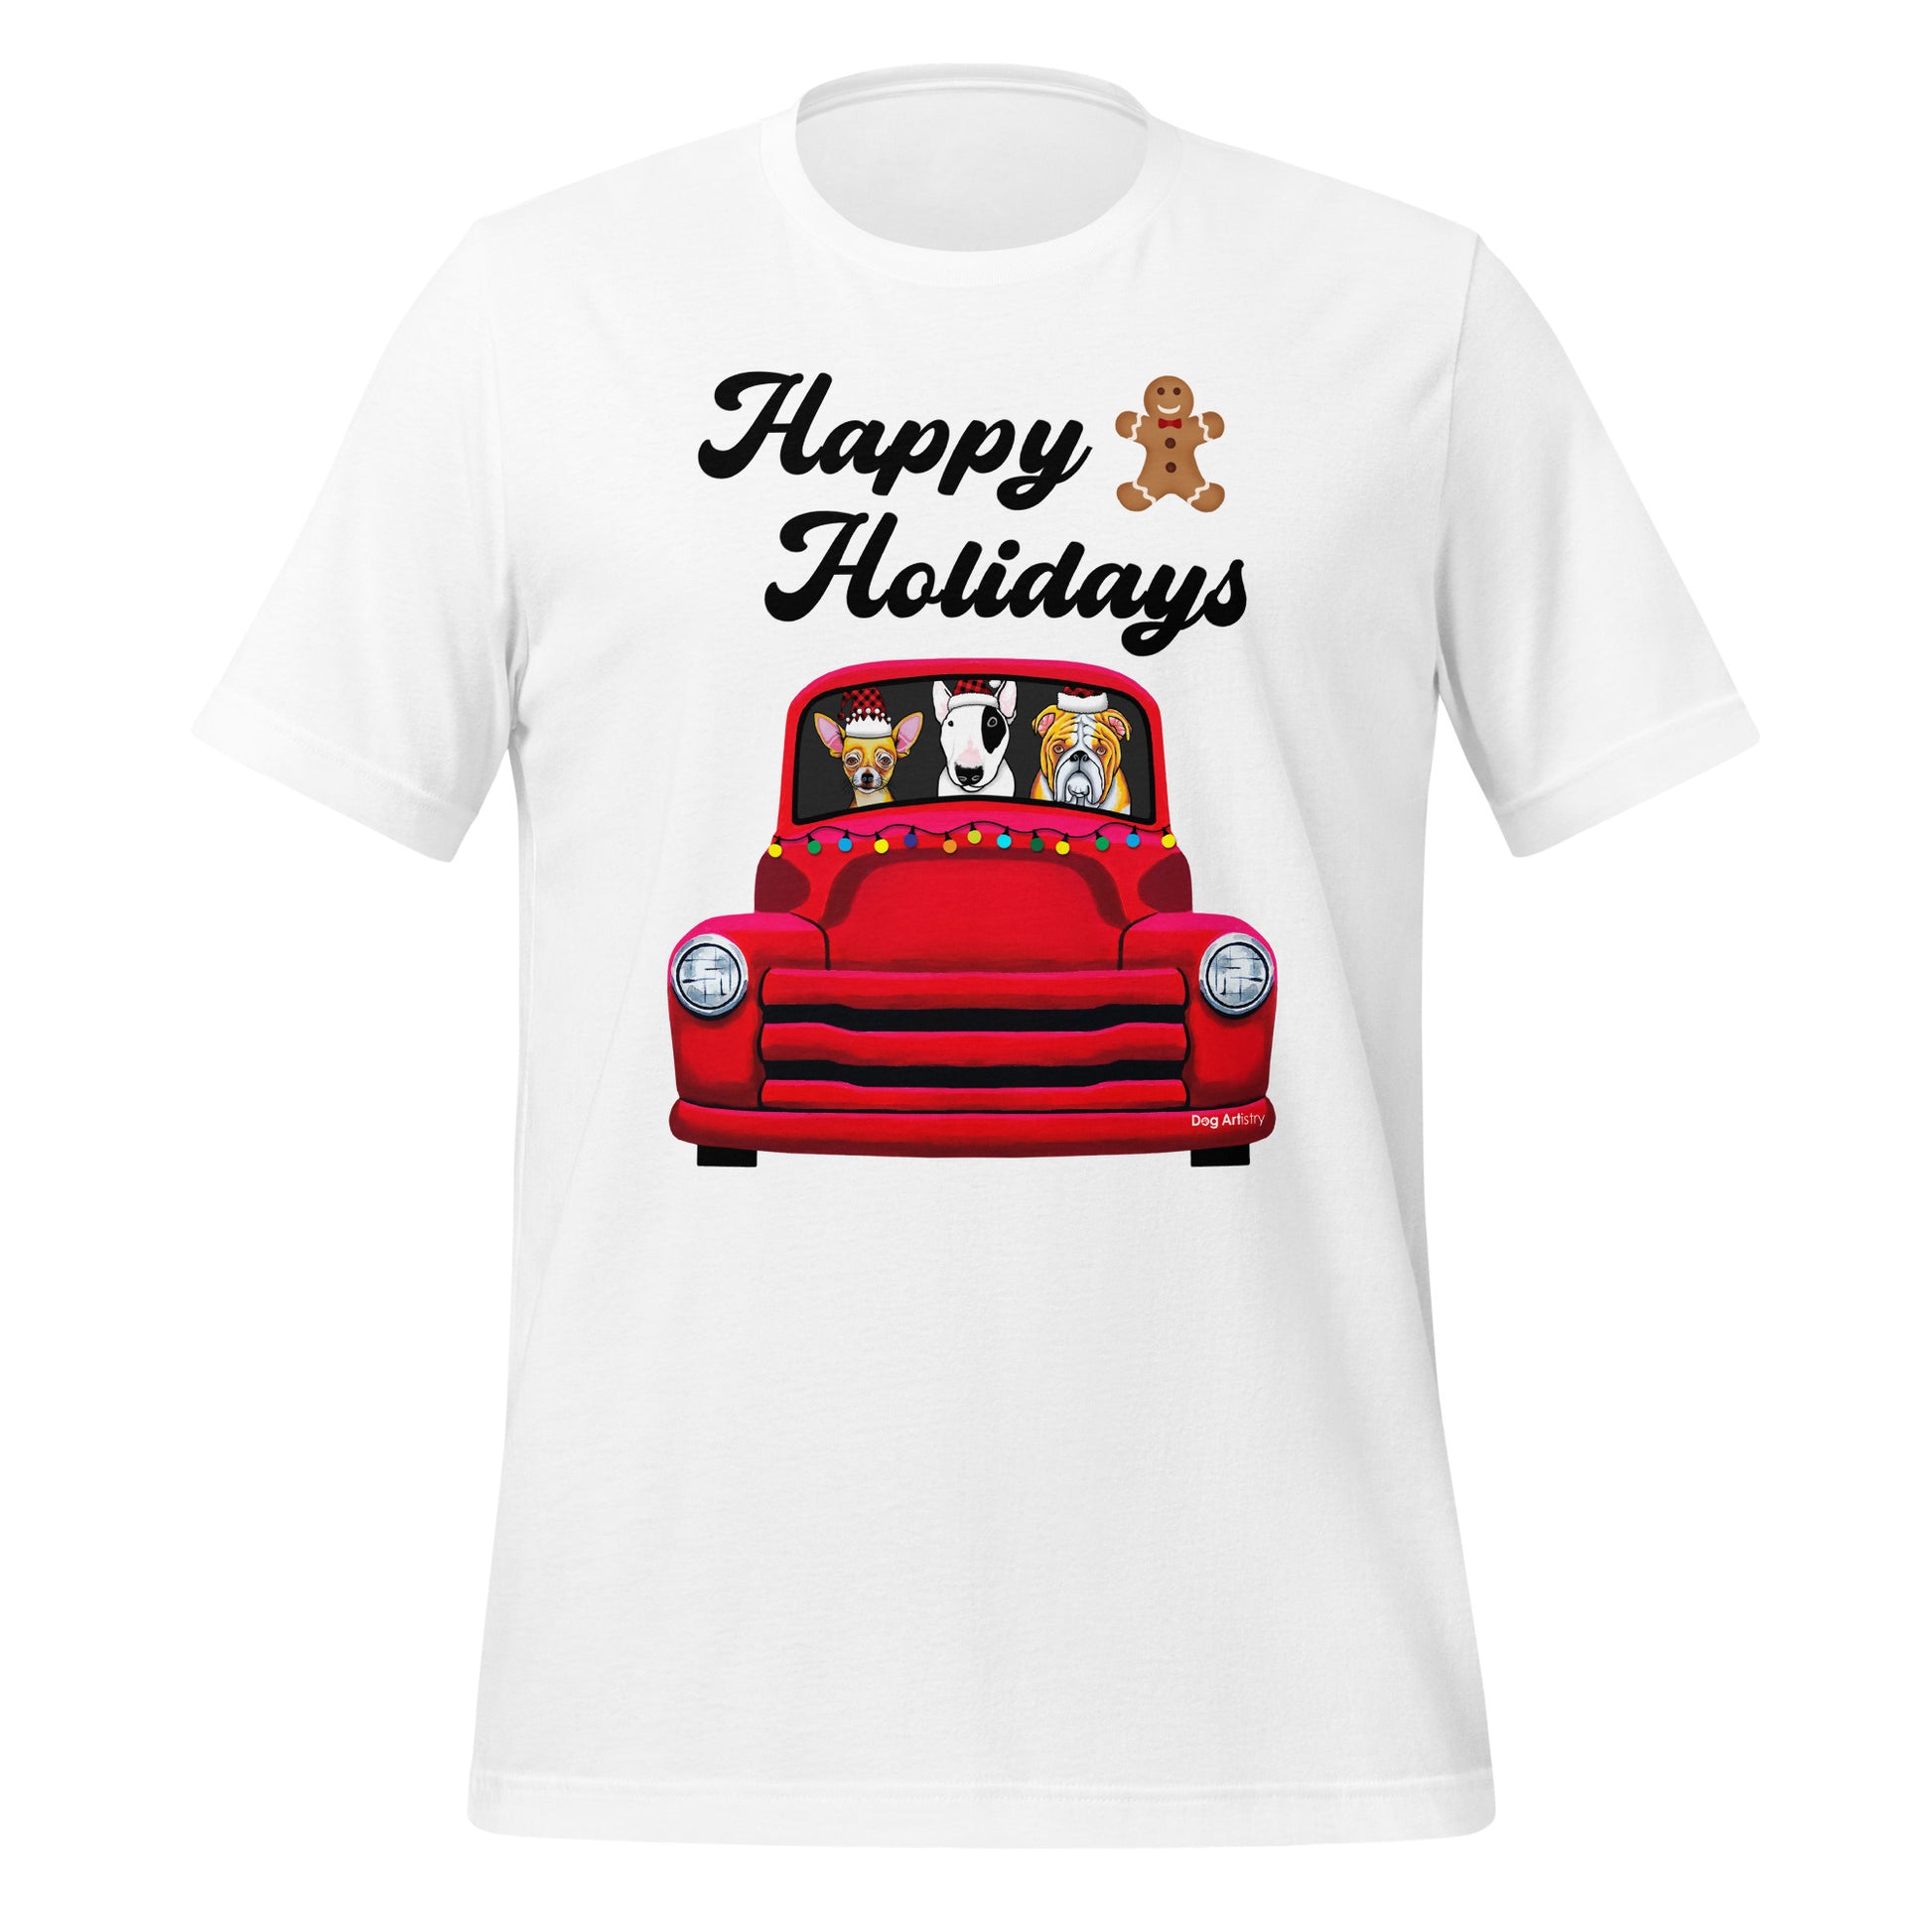 Red Holiday truck with Chihuahua, English Bull Terrier, and English Bulldog riding in it unisex t-shirt white by Dog Artistry